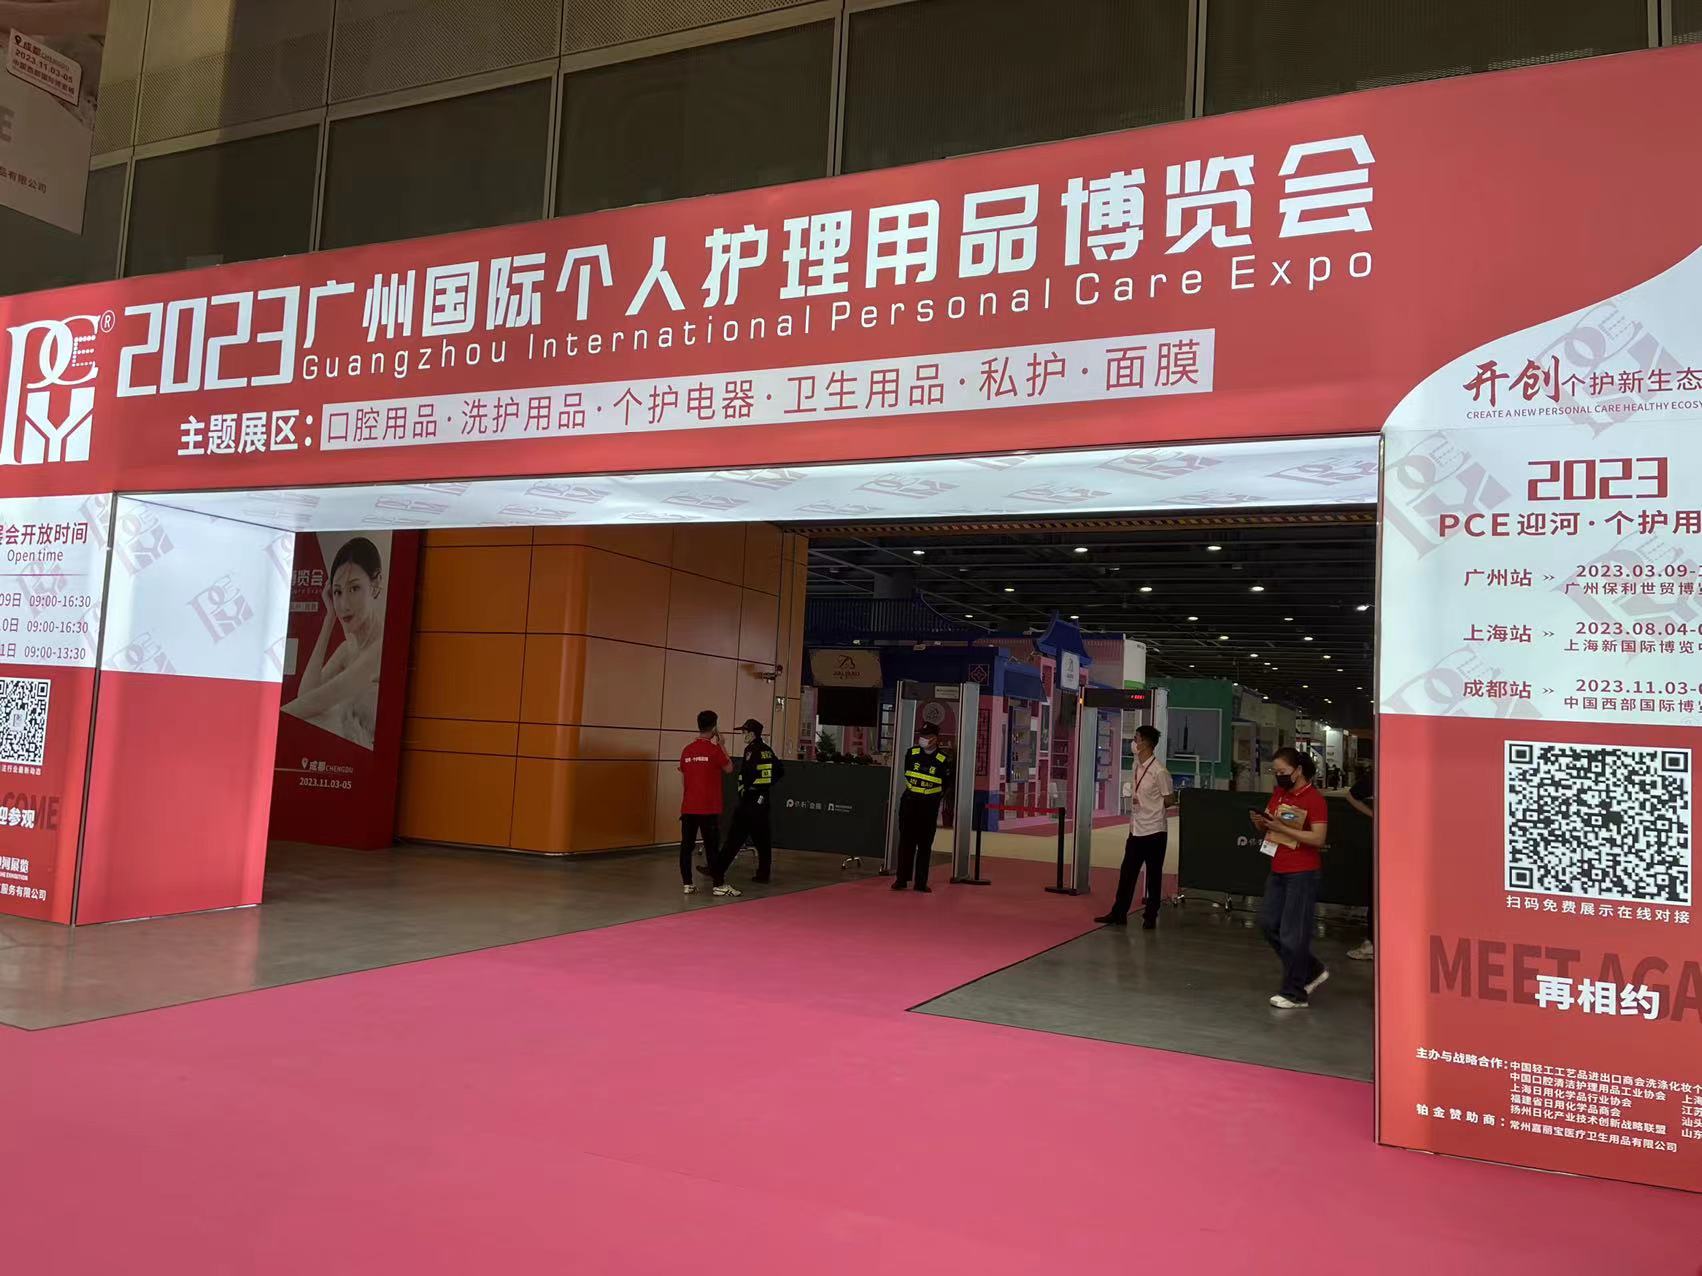 International Personal Care Exhibition 2023 China